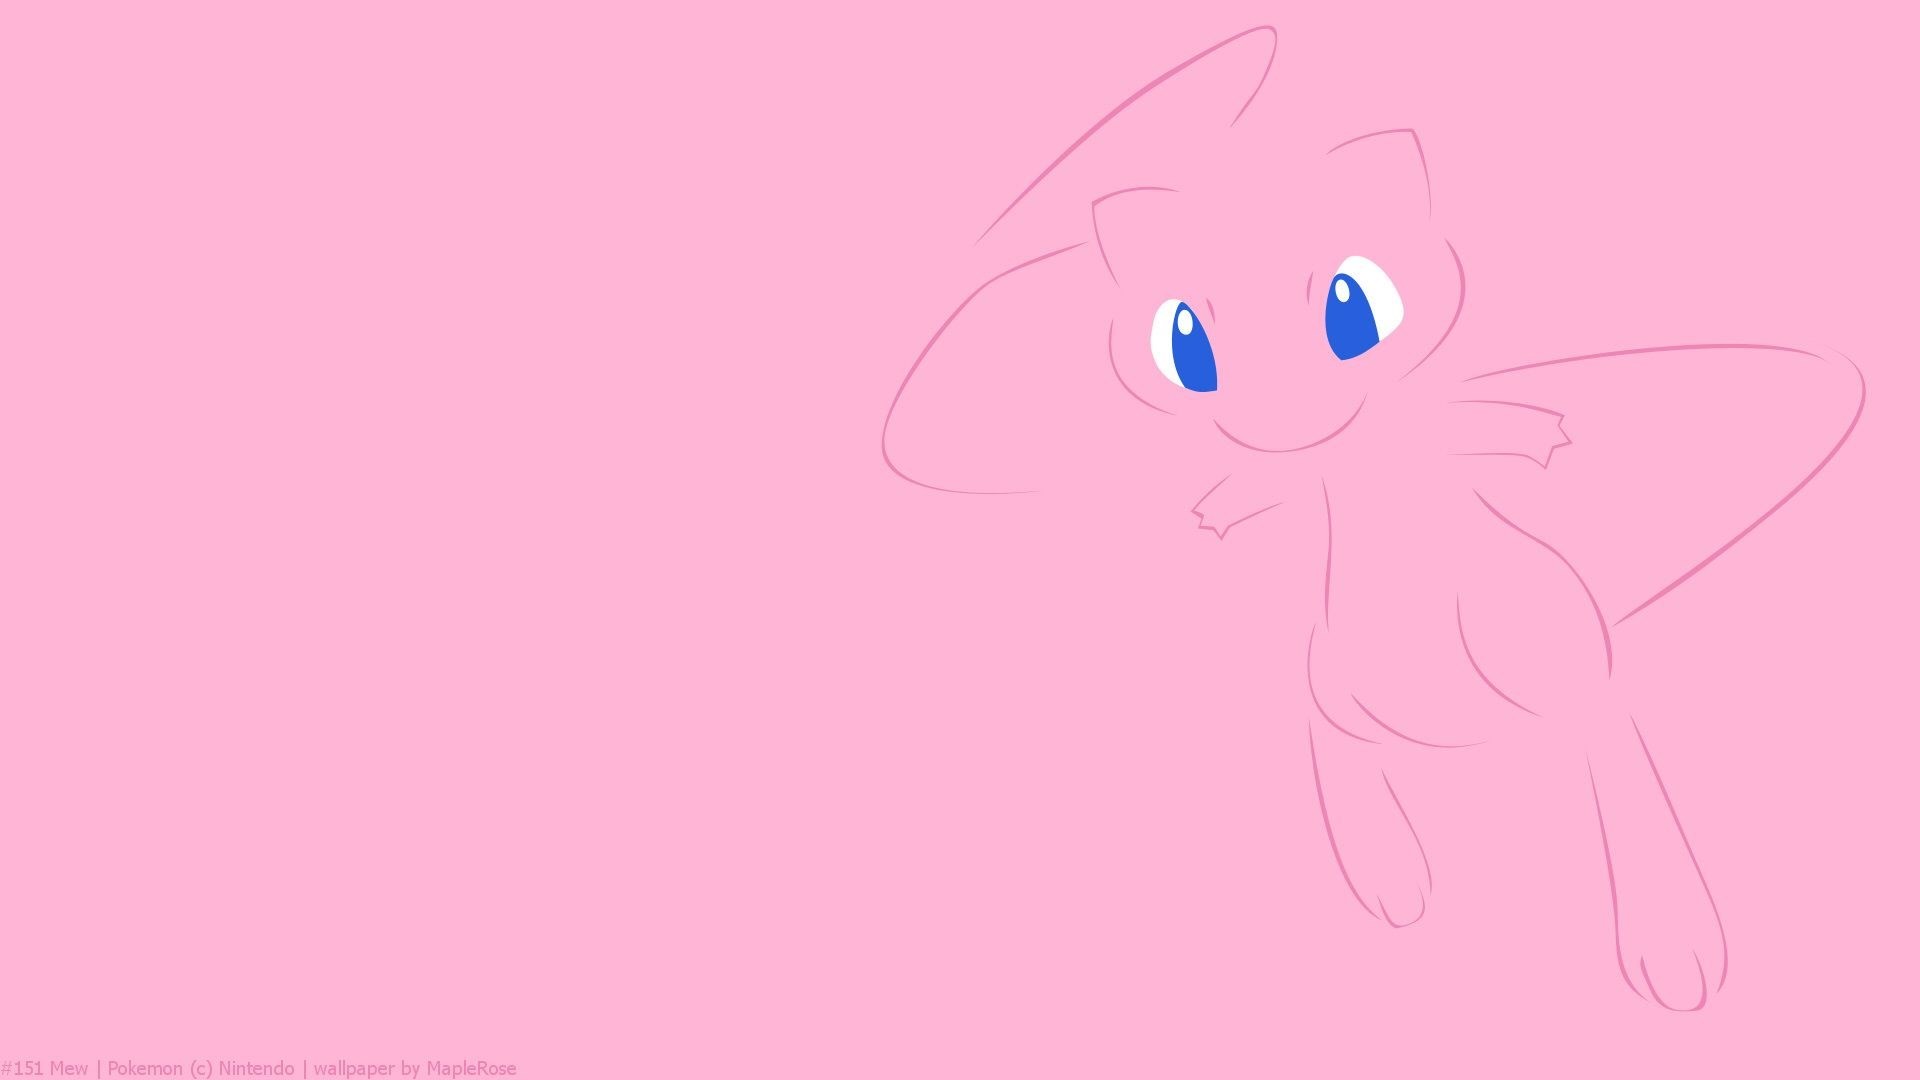 mew and mewtwo wallpaper